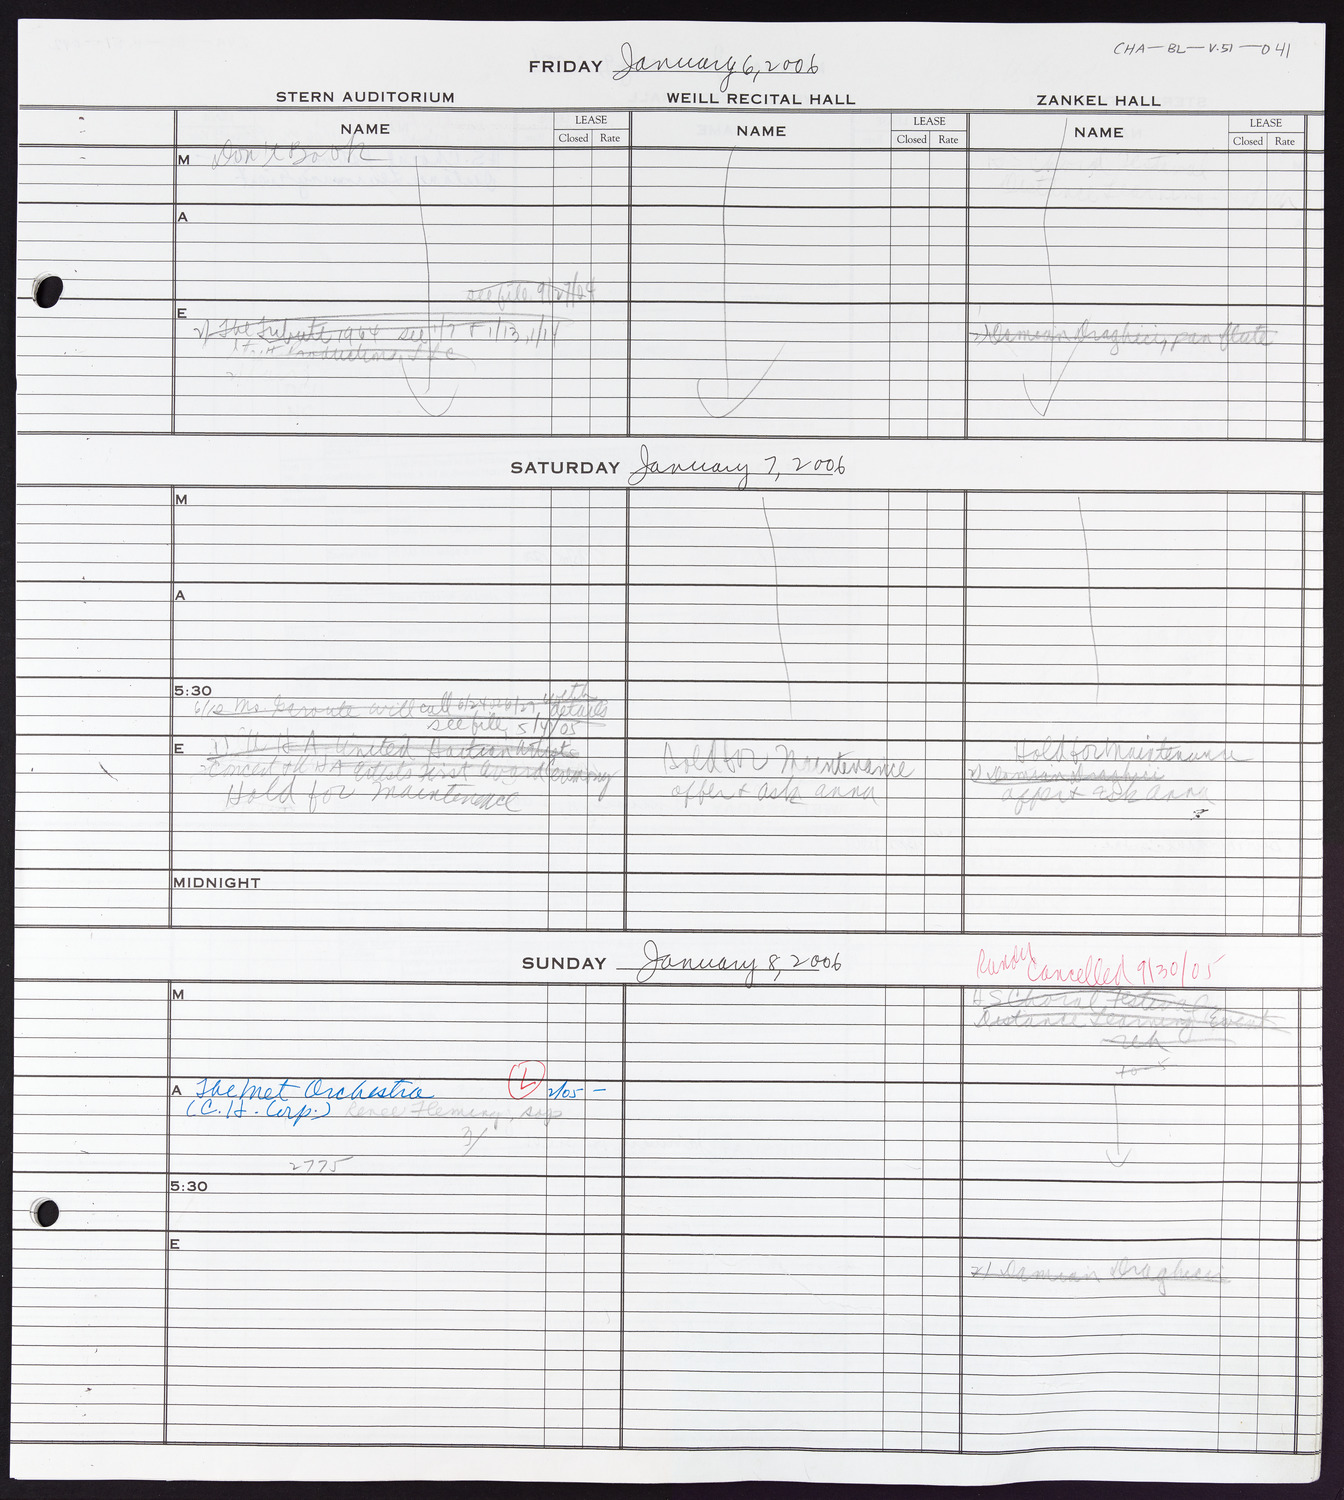 Carnegie Hall Booking Ledger, volume 51, page 41